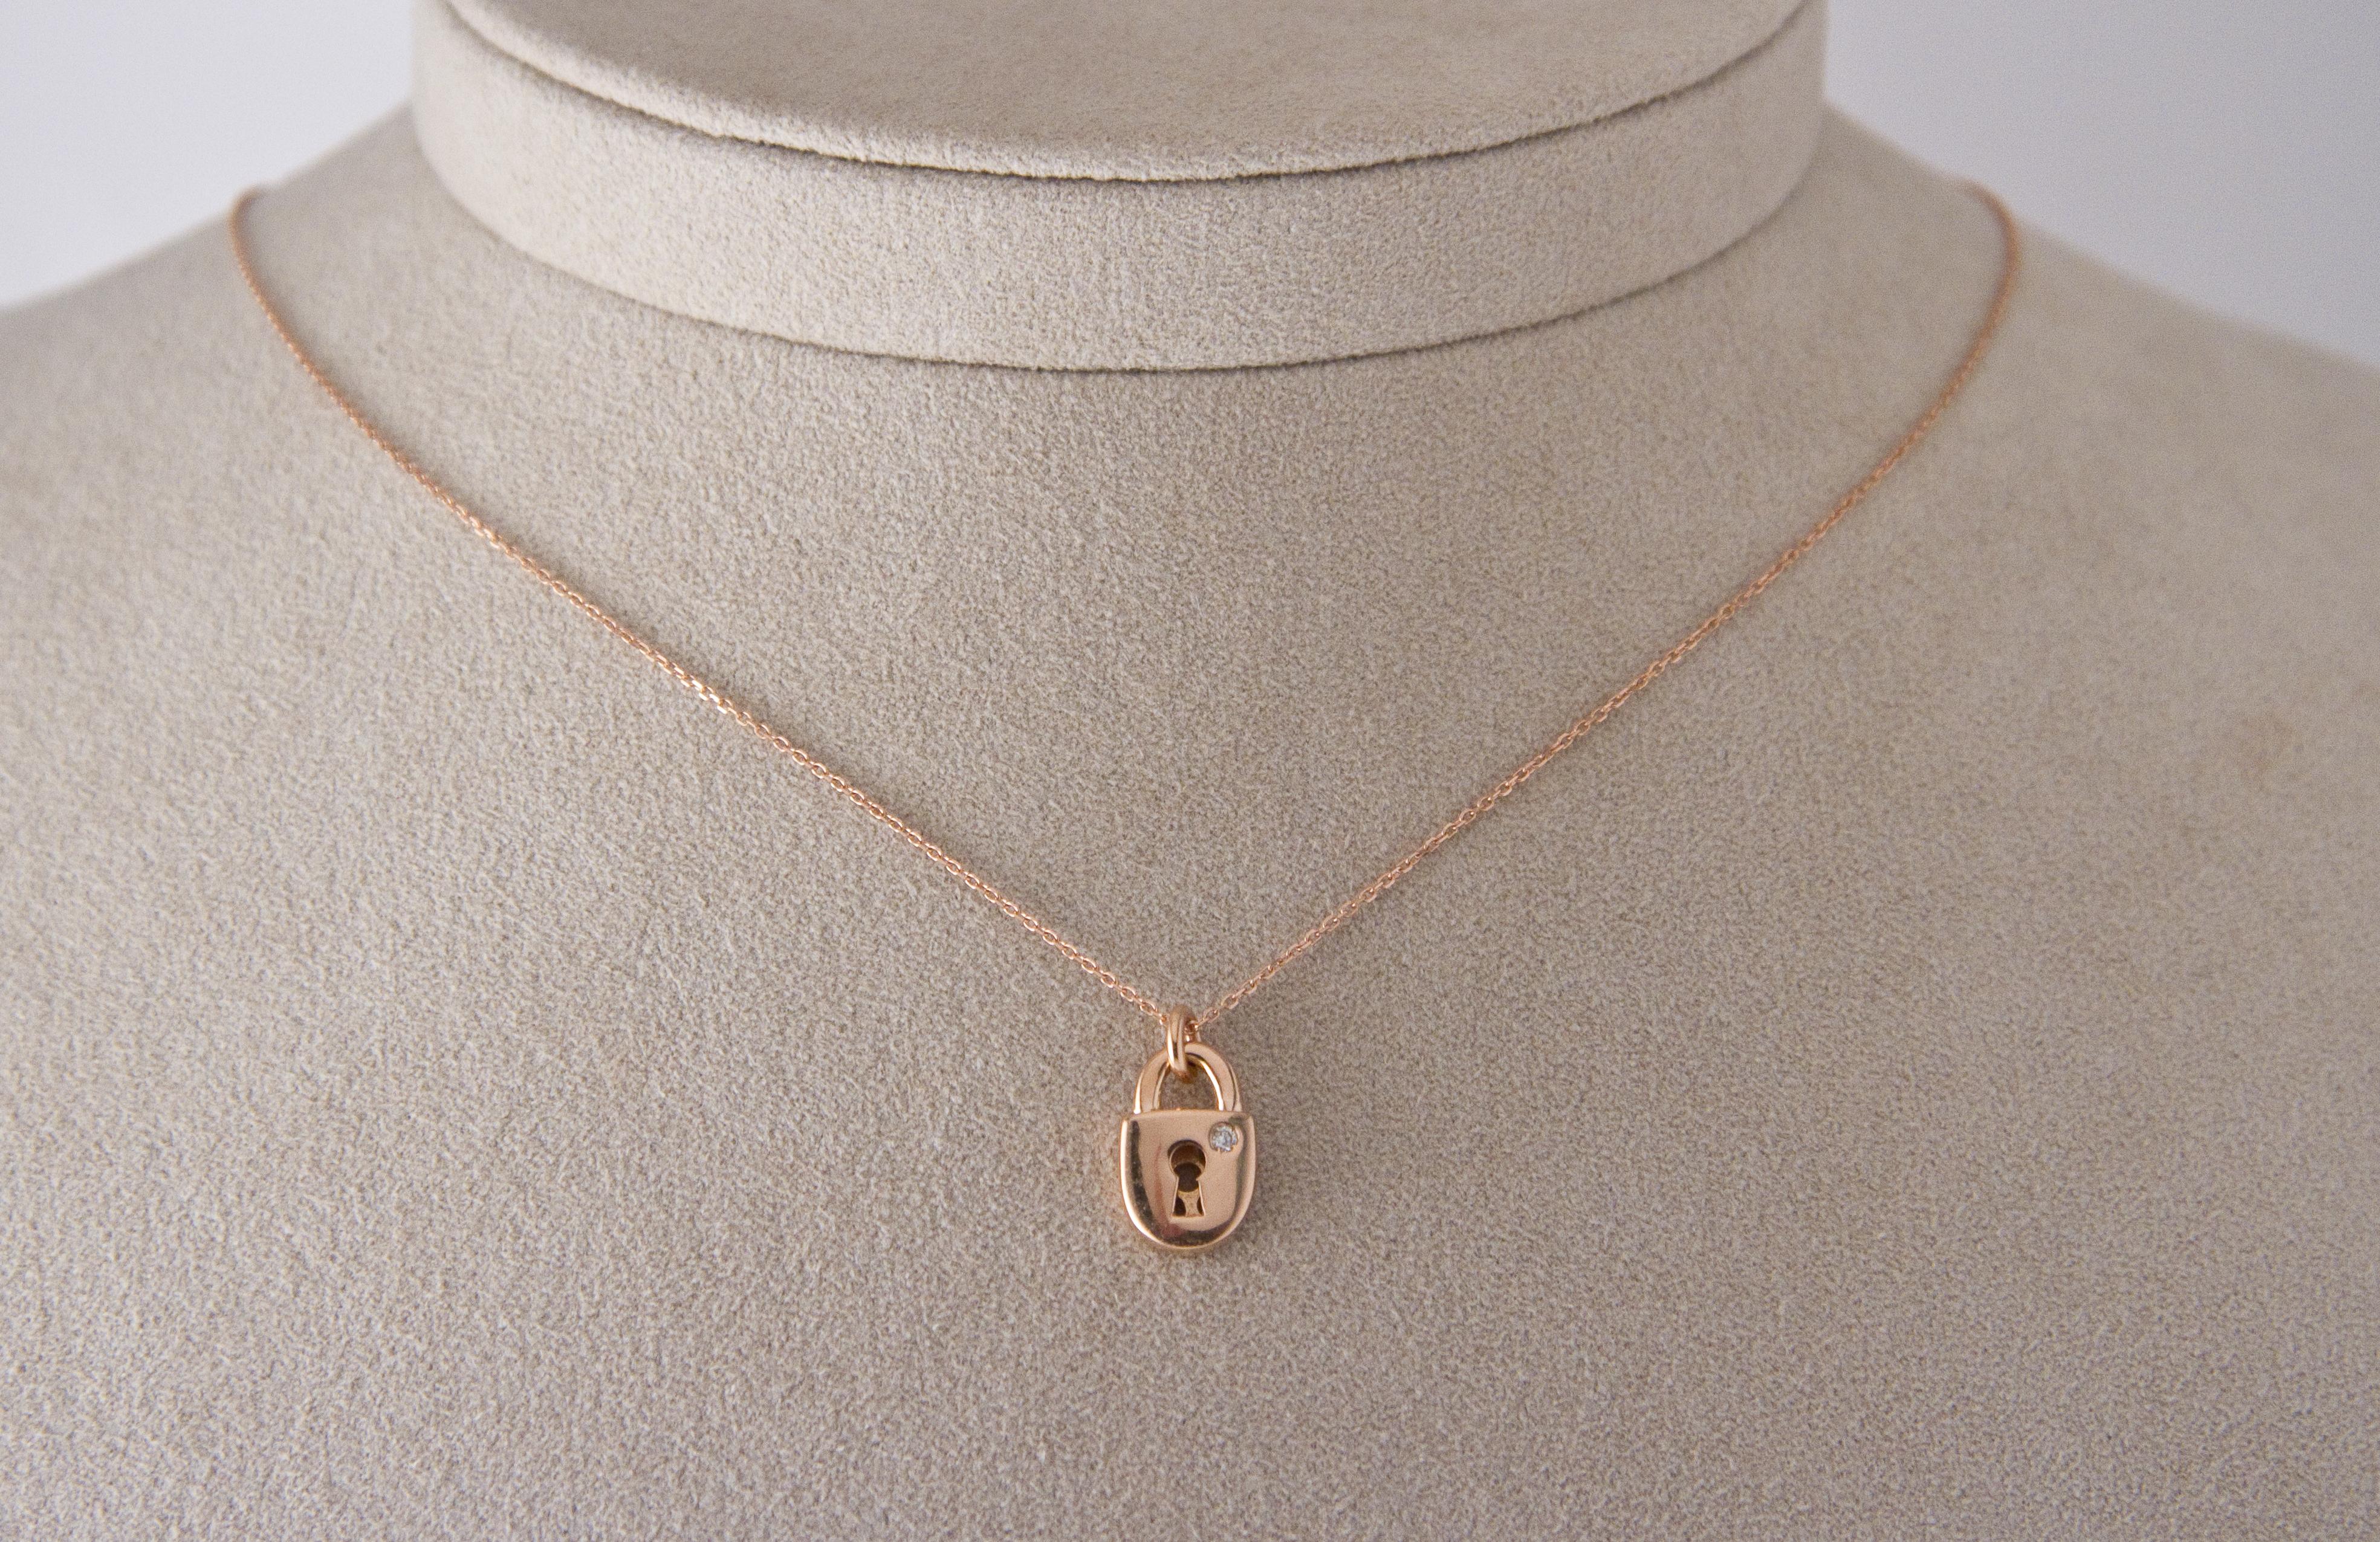 Express your personal style with this exquisite rose gold necklace, featuring a padlock design. Crafted with meticulous attention to detail and expert craftsmanship, this necklace epitomizes bold modernity.

The padlock pendant features a delicate,